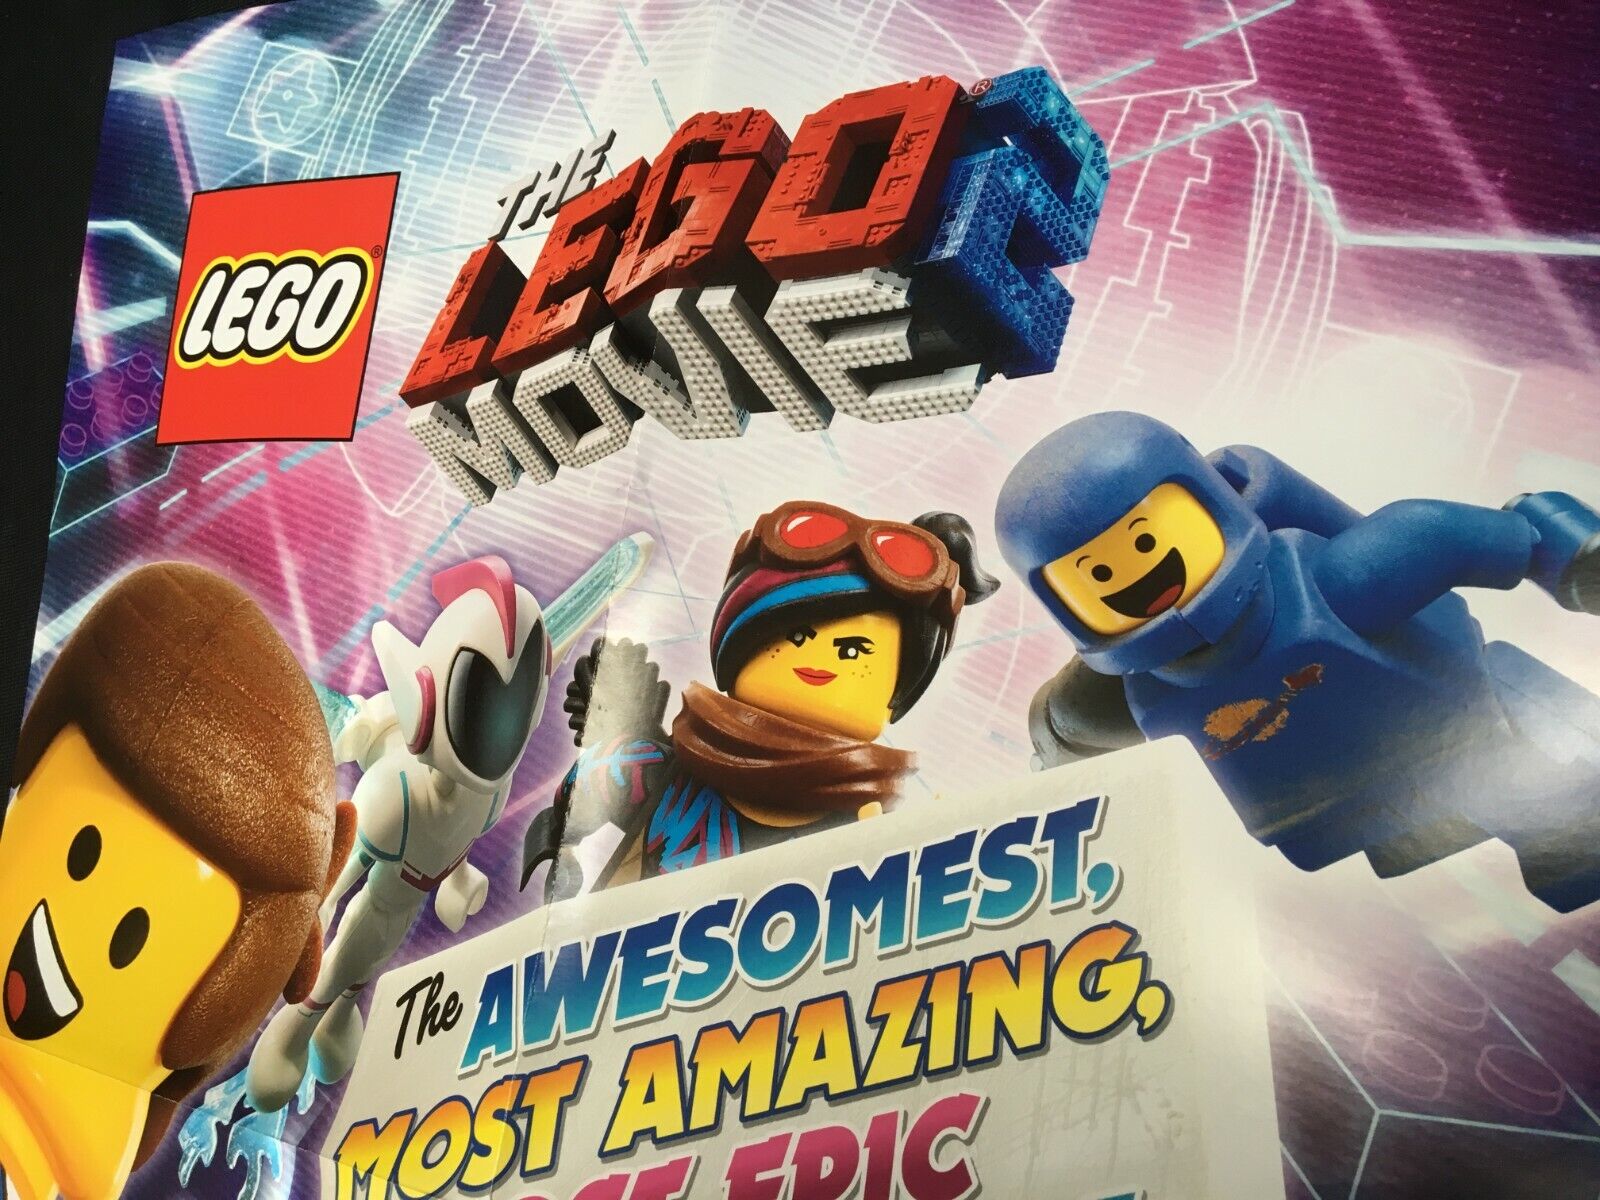 "LEGO MOVIE 2" Awesomest MOVIE GUIDE Promotional 18 x 24 PROMO POSTER NEW!